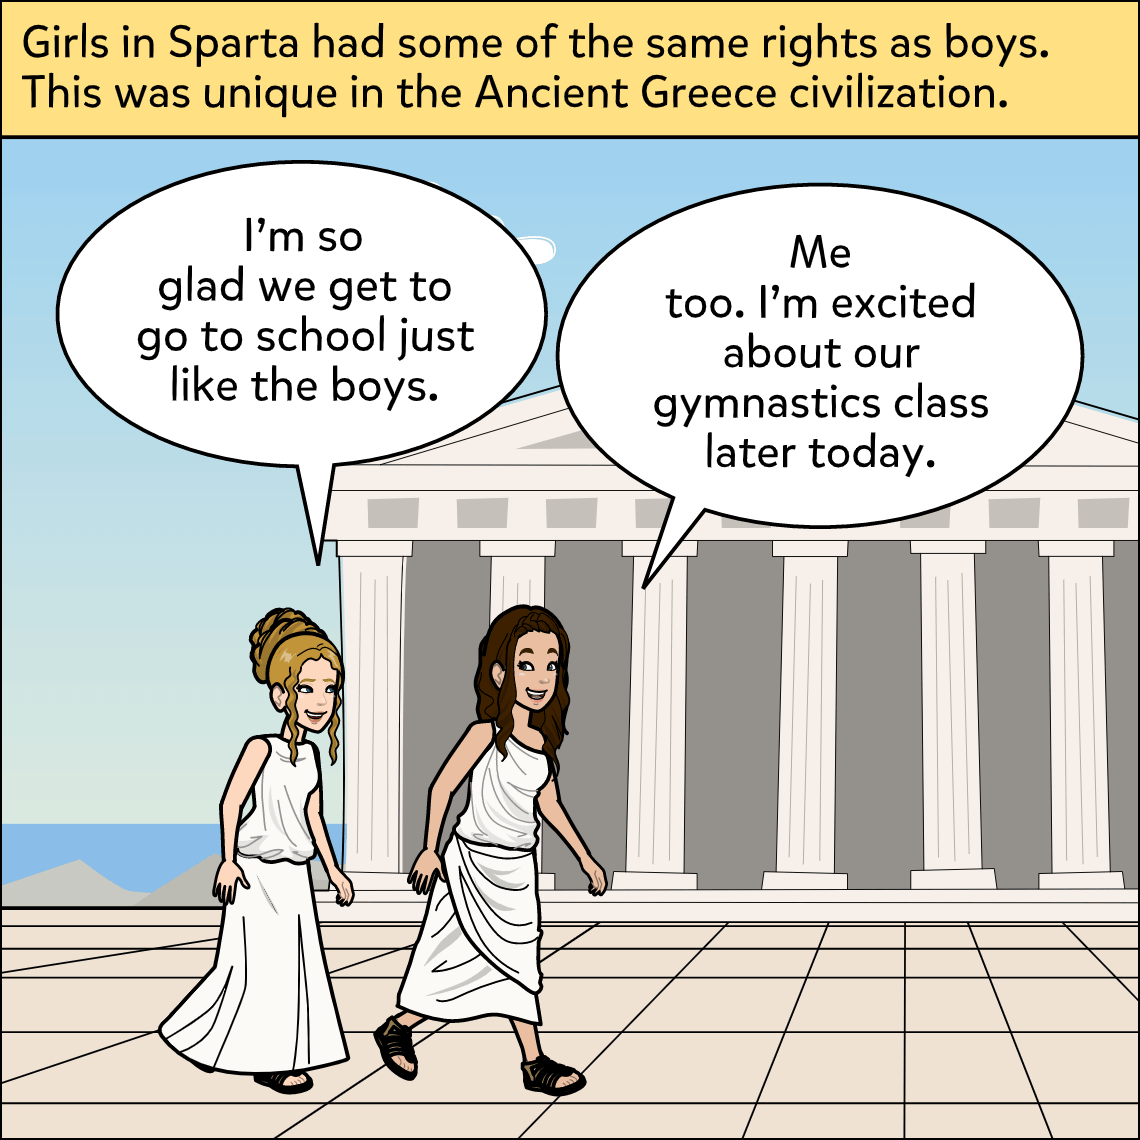 athens and sparta similarities